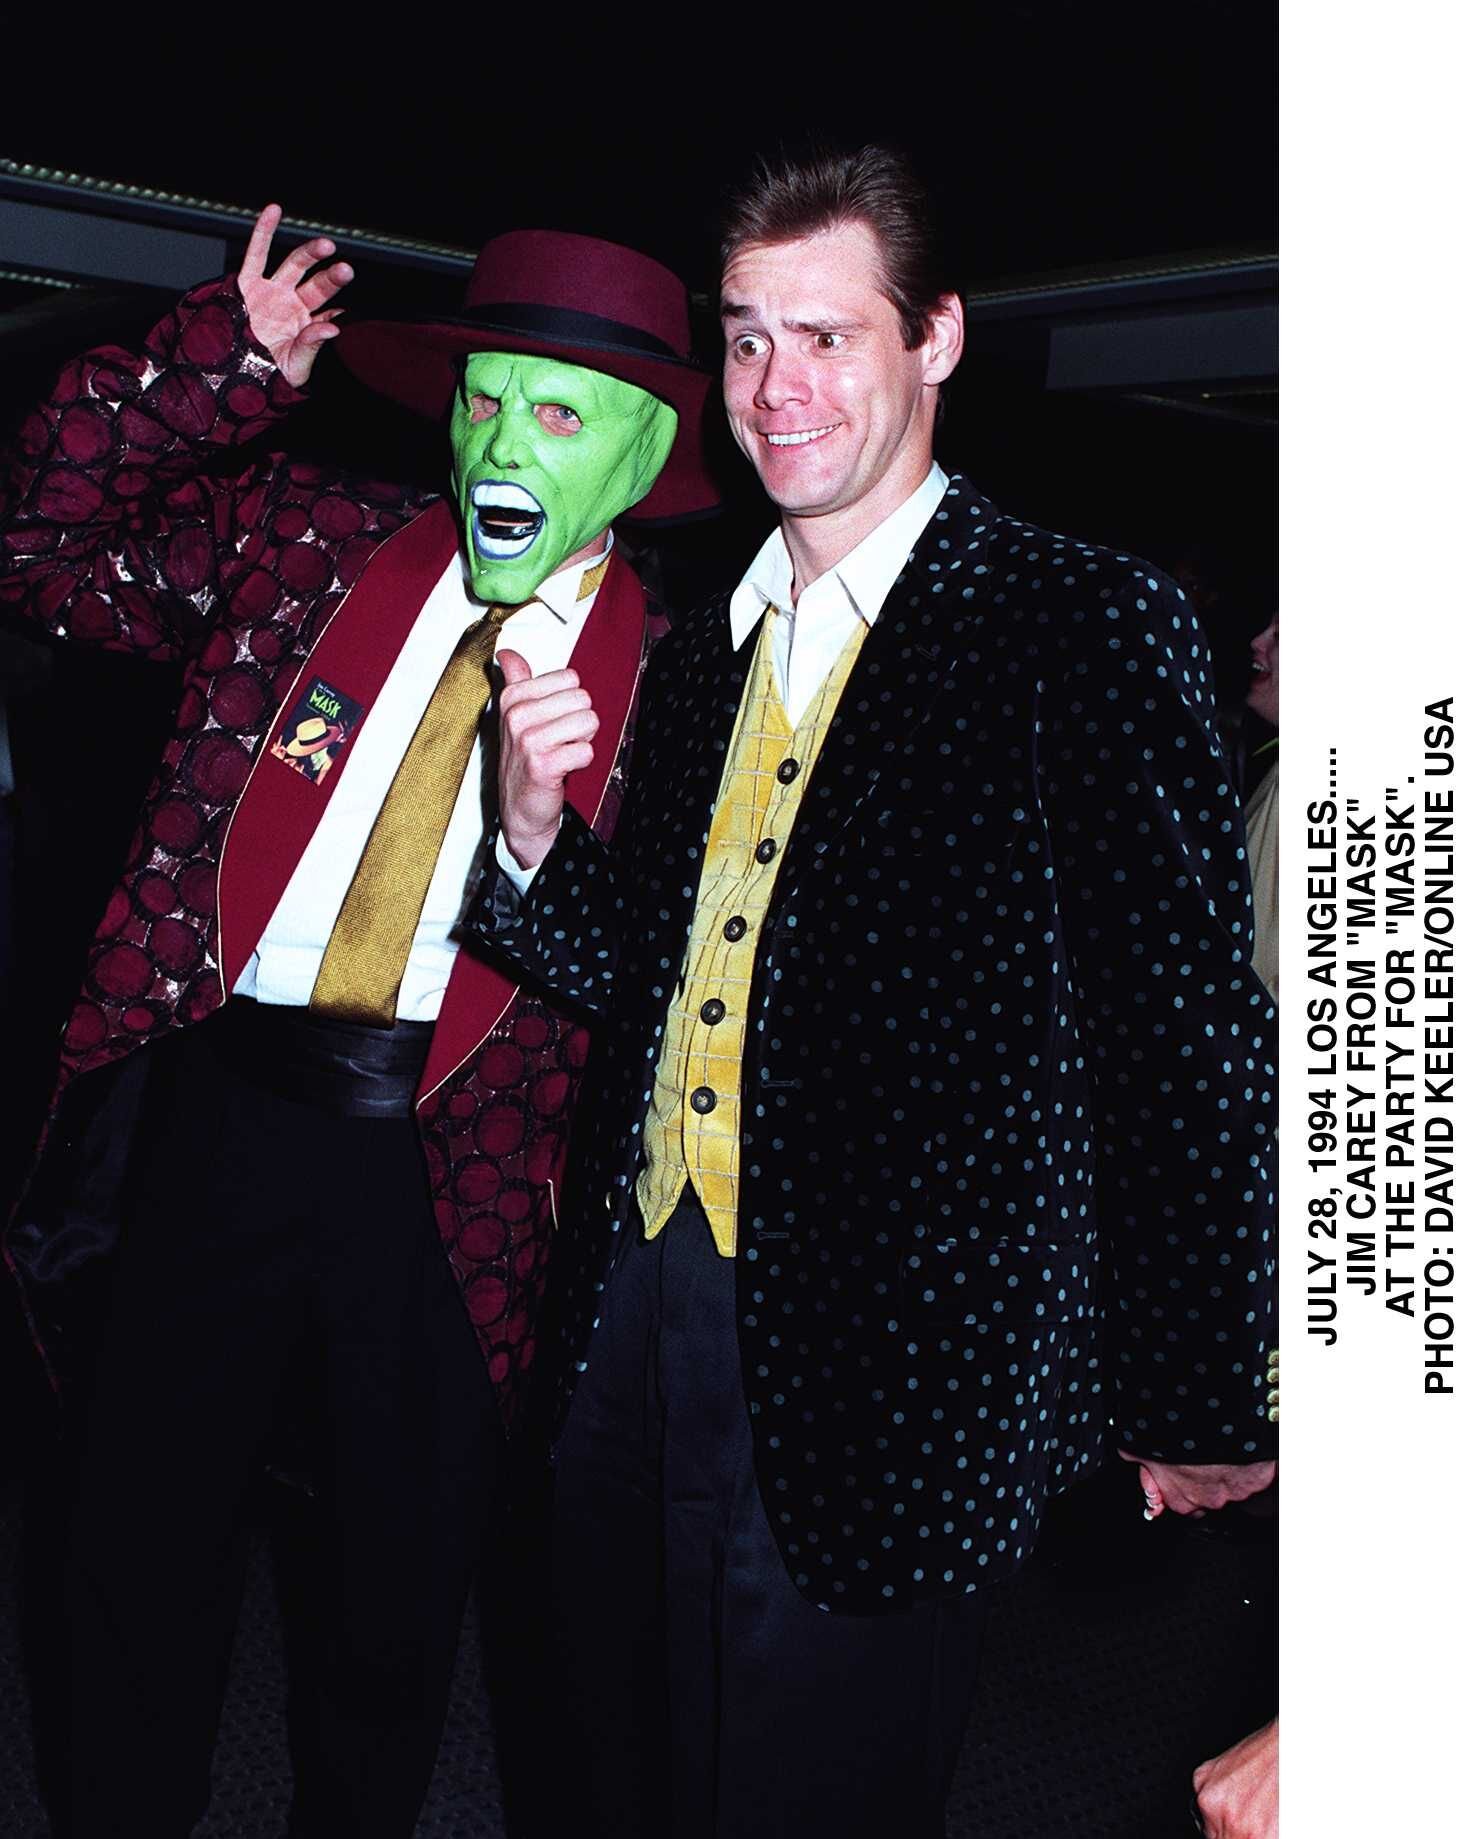 Jim Carrey At The Premiere Party For "Mask" in Los Angeles on July 28, 1994 | Getty Images